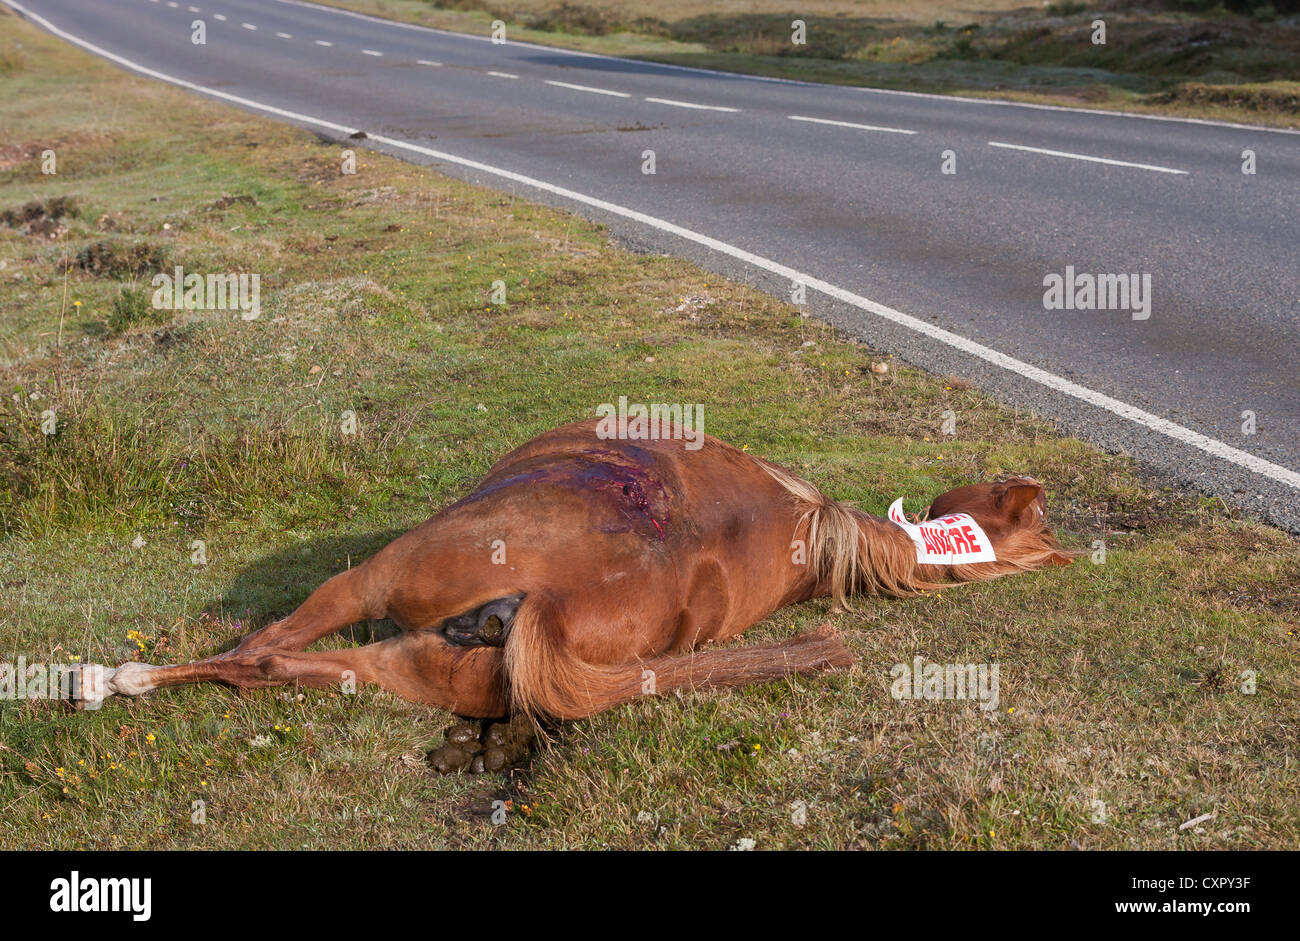 A pony has been hit and killed on the road by a car or lorry in the New Forest National Park, UK Stock Photo